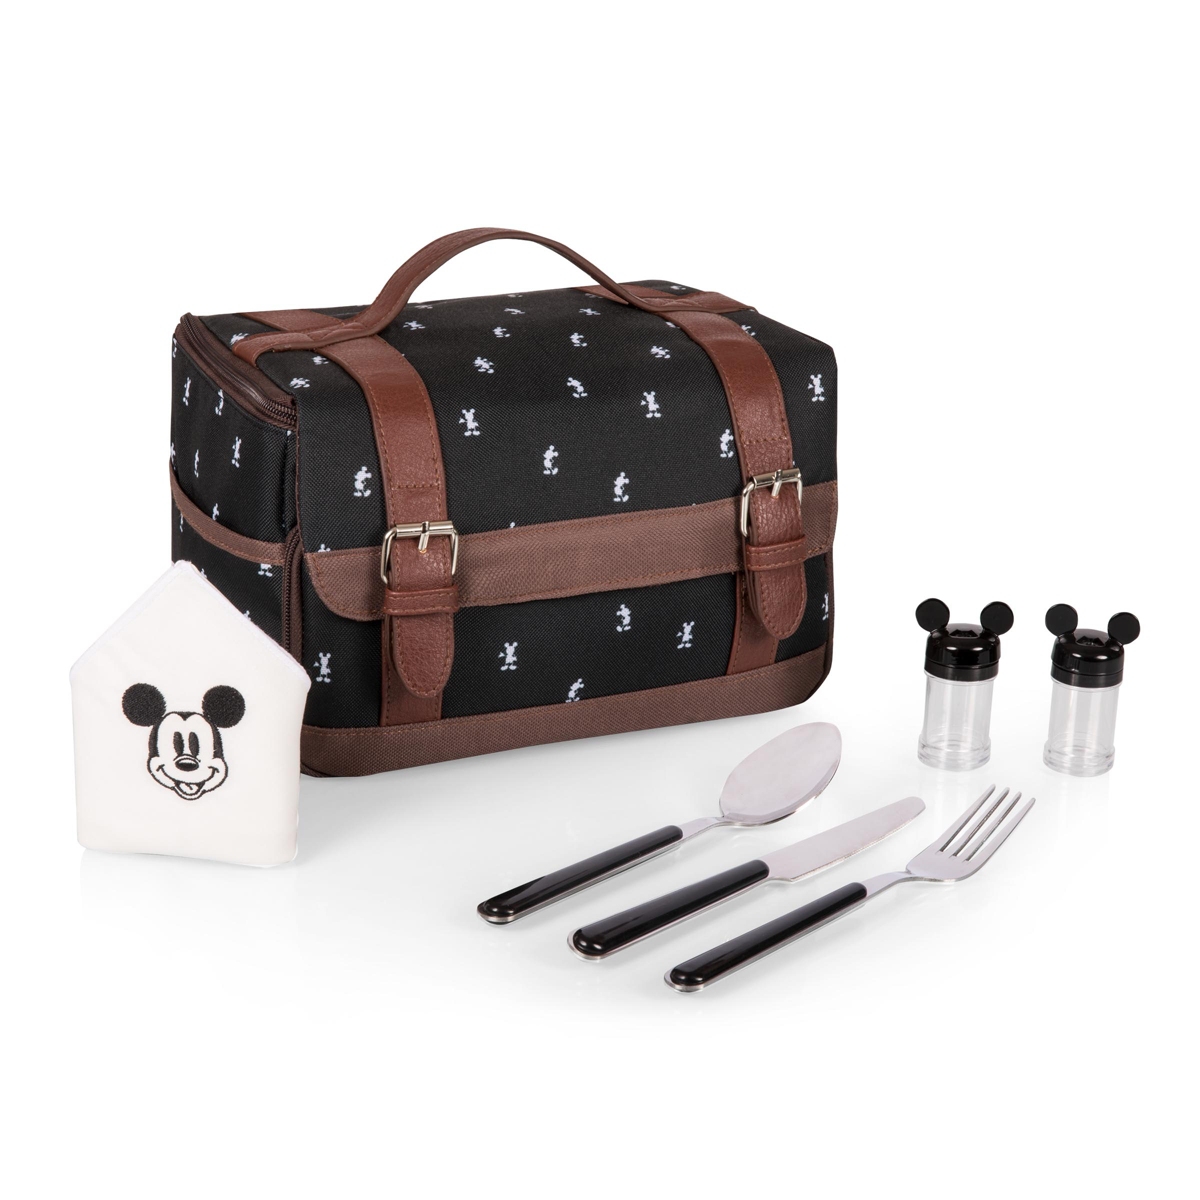 Lunch Tote - Mickey - Black